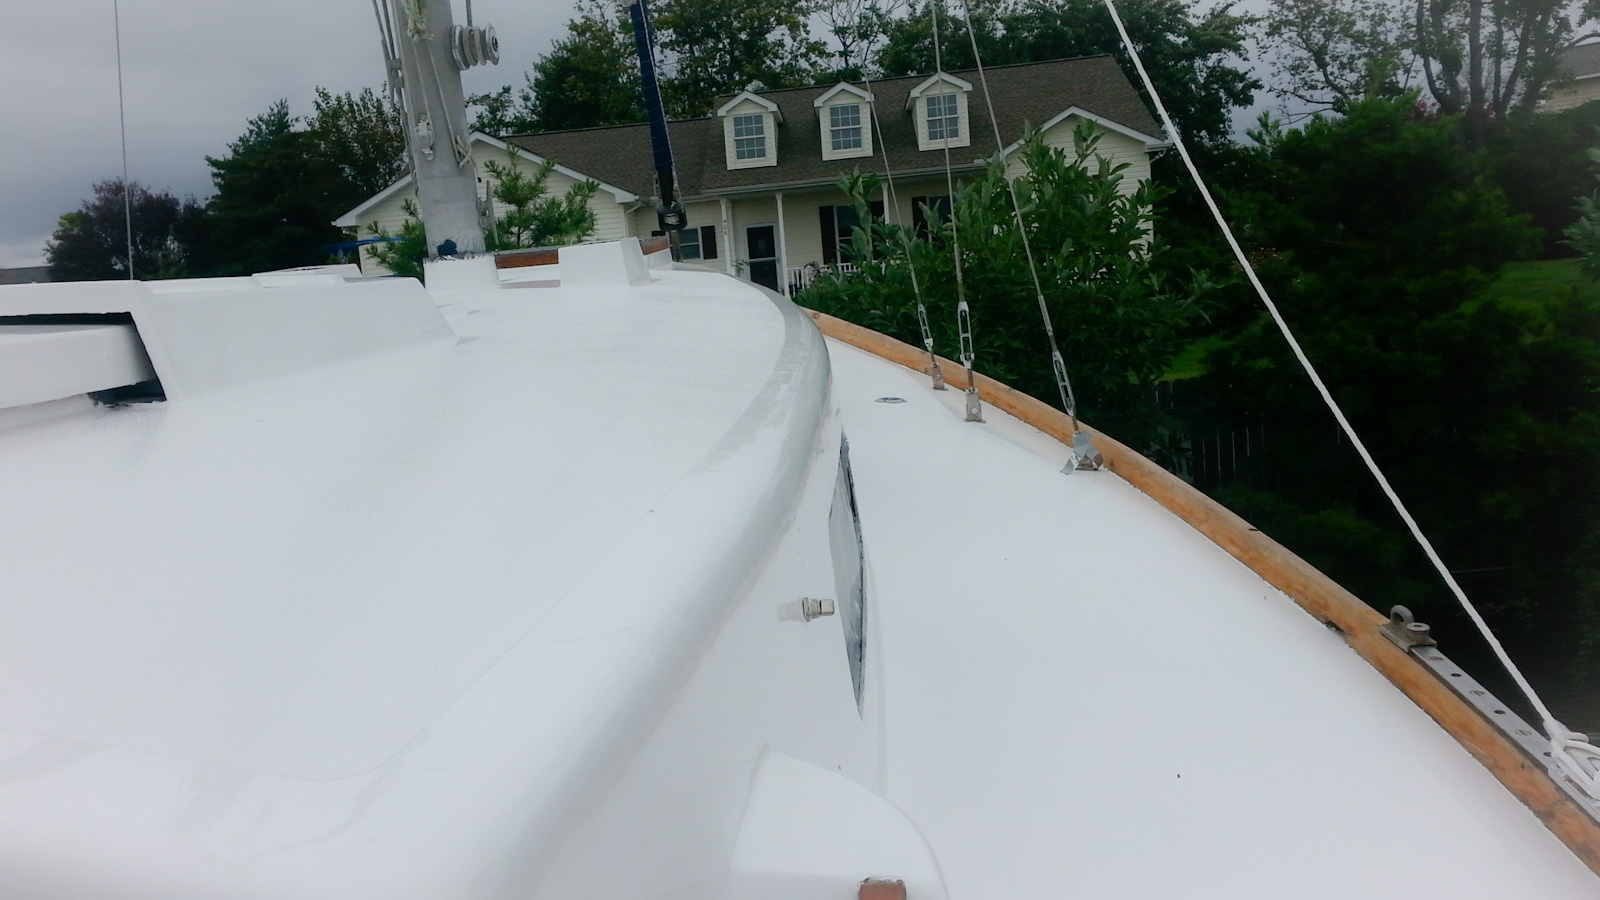 Awlgrip Painter Painting Boat in Maryland